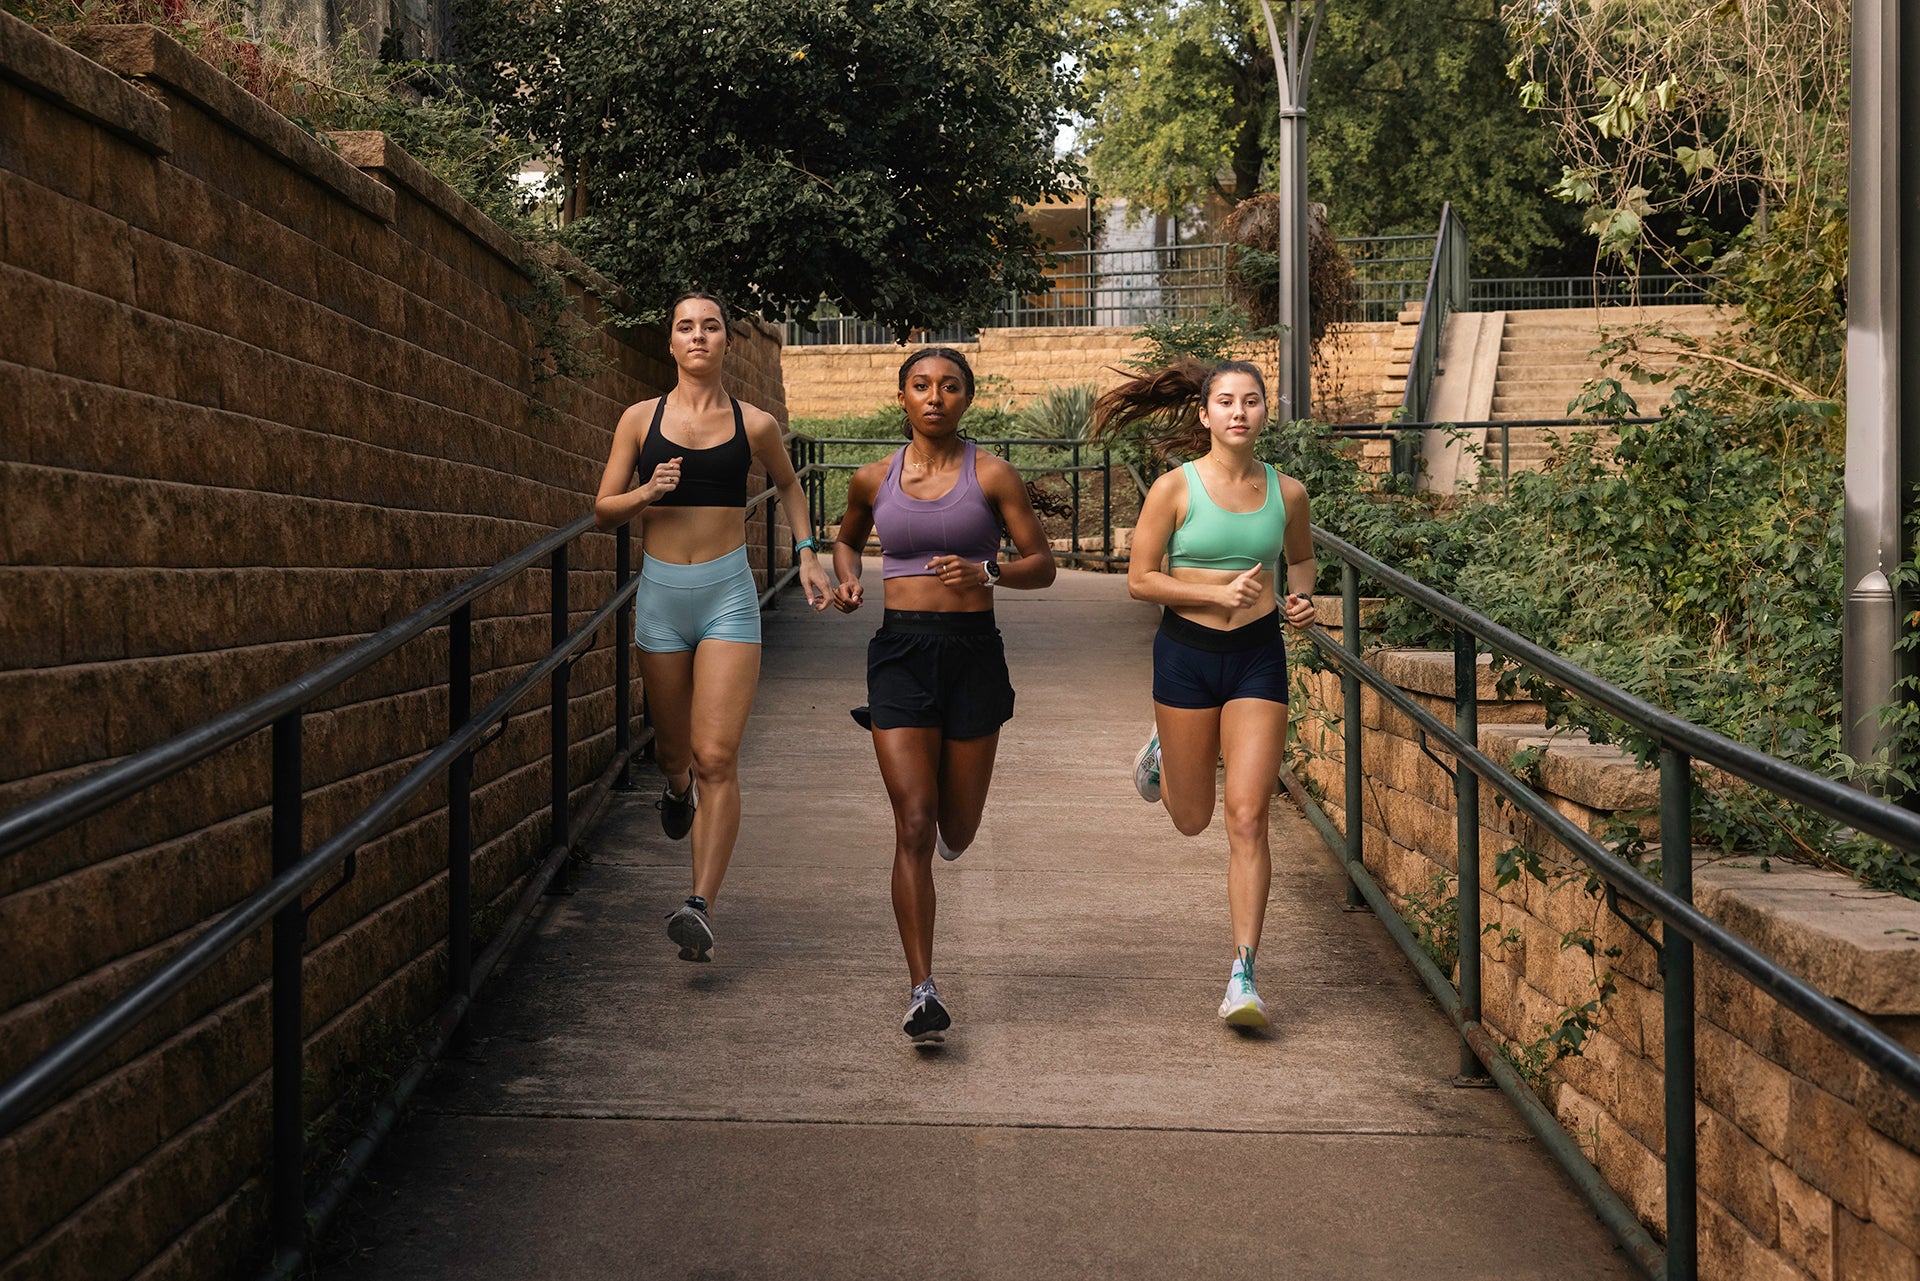 Three women running down a sidewalk next a rock wall and railings with Forerunner 165 running watches on